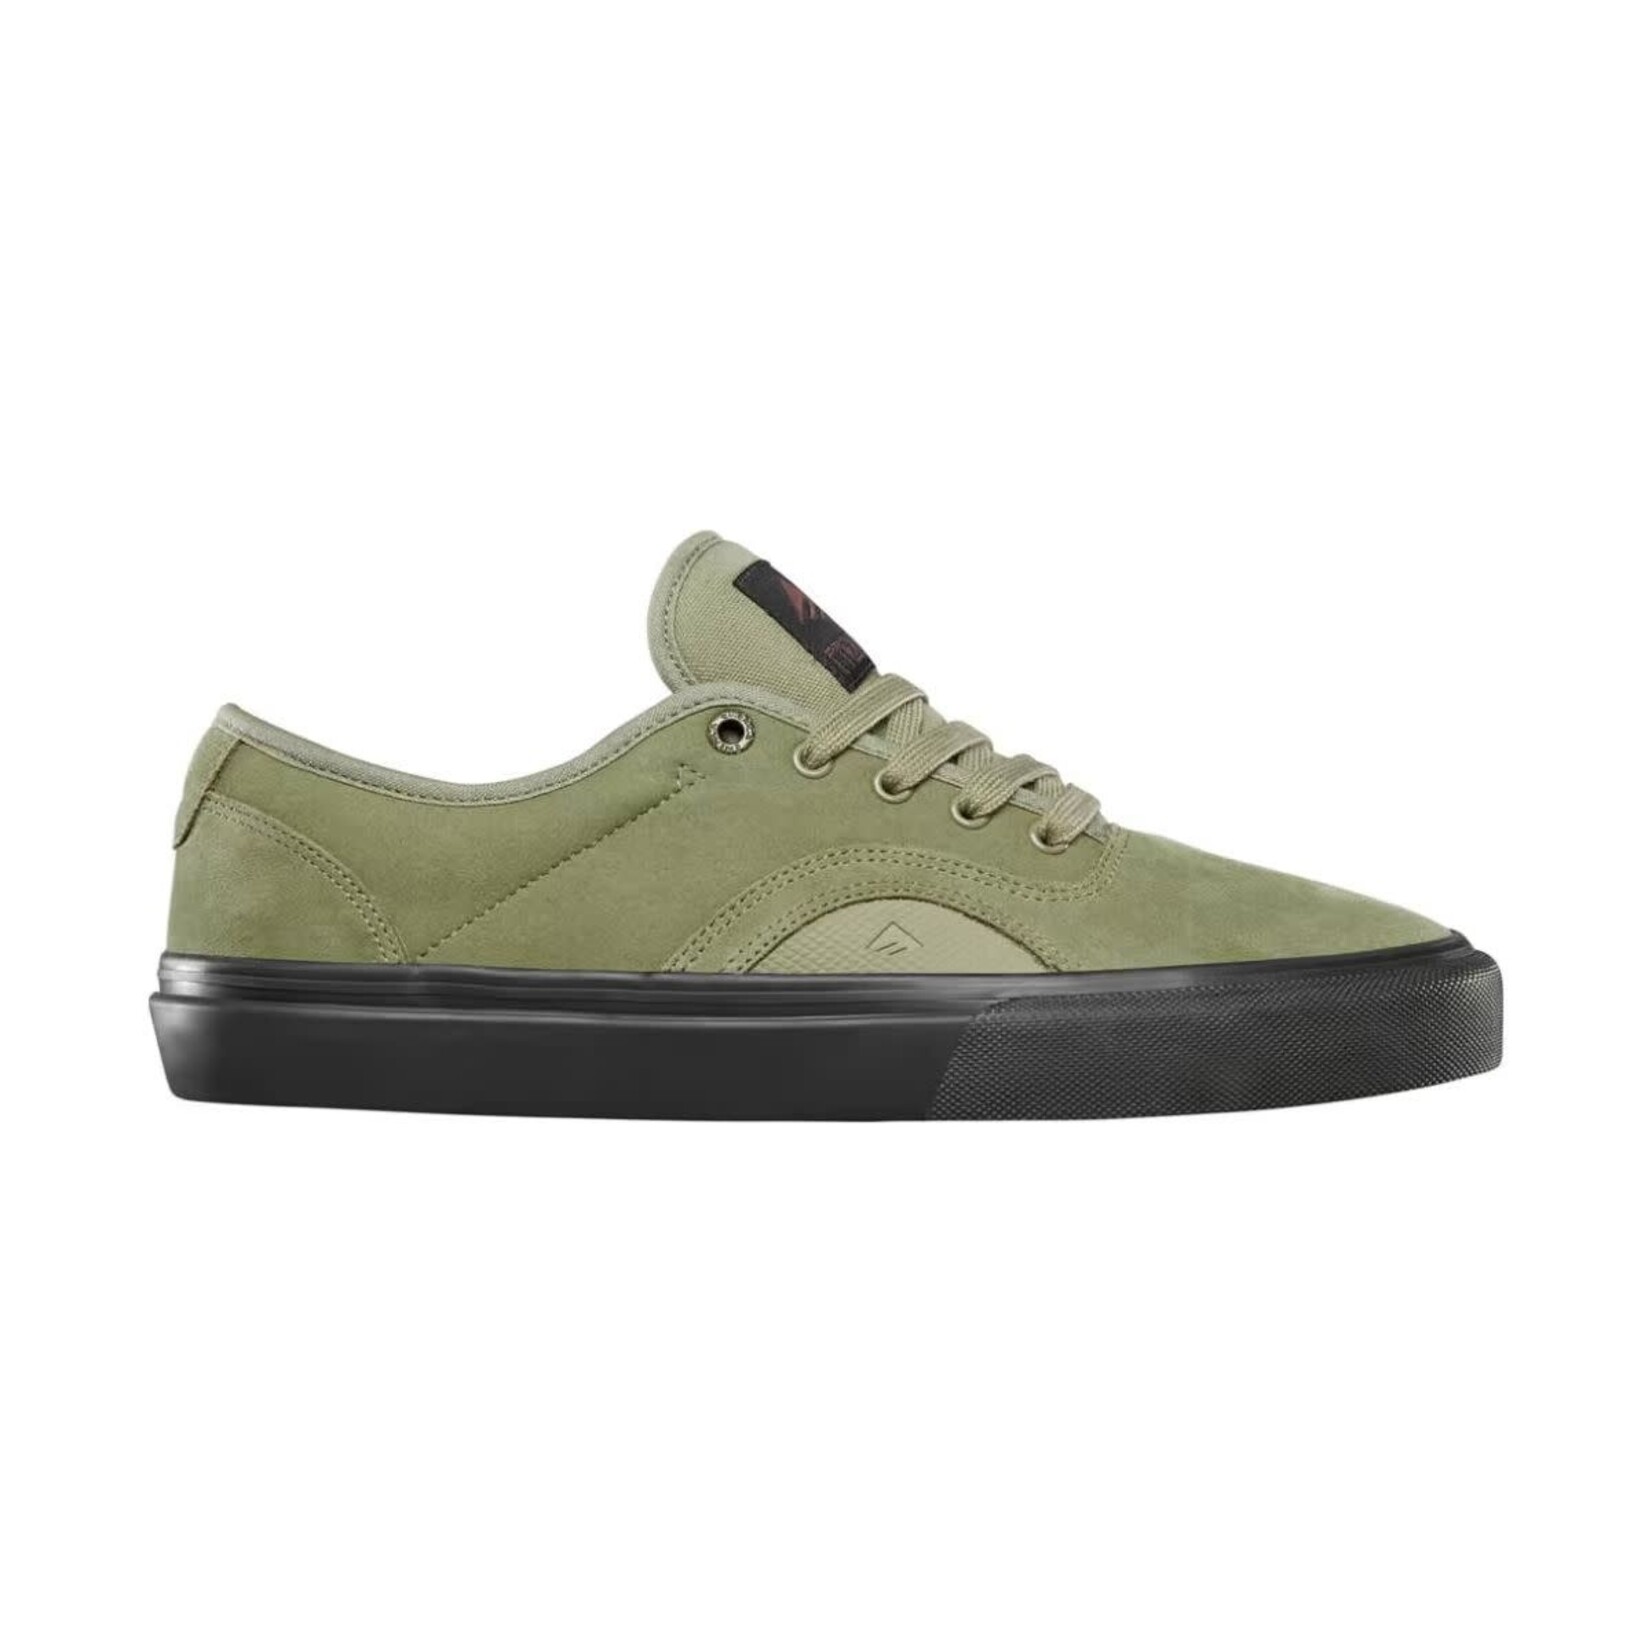 Buy Women Olive Casual Lace Up Shoes Online - 720643 | Allen Solly